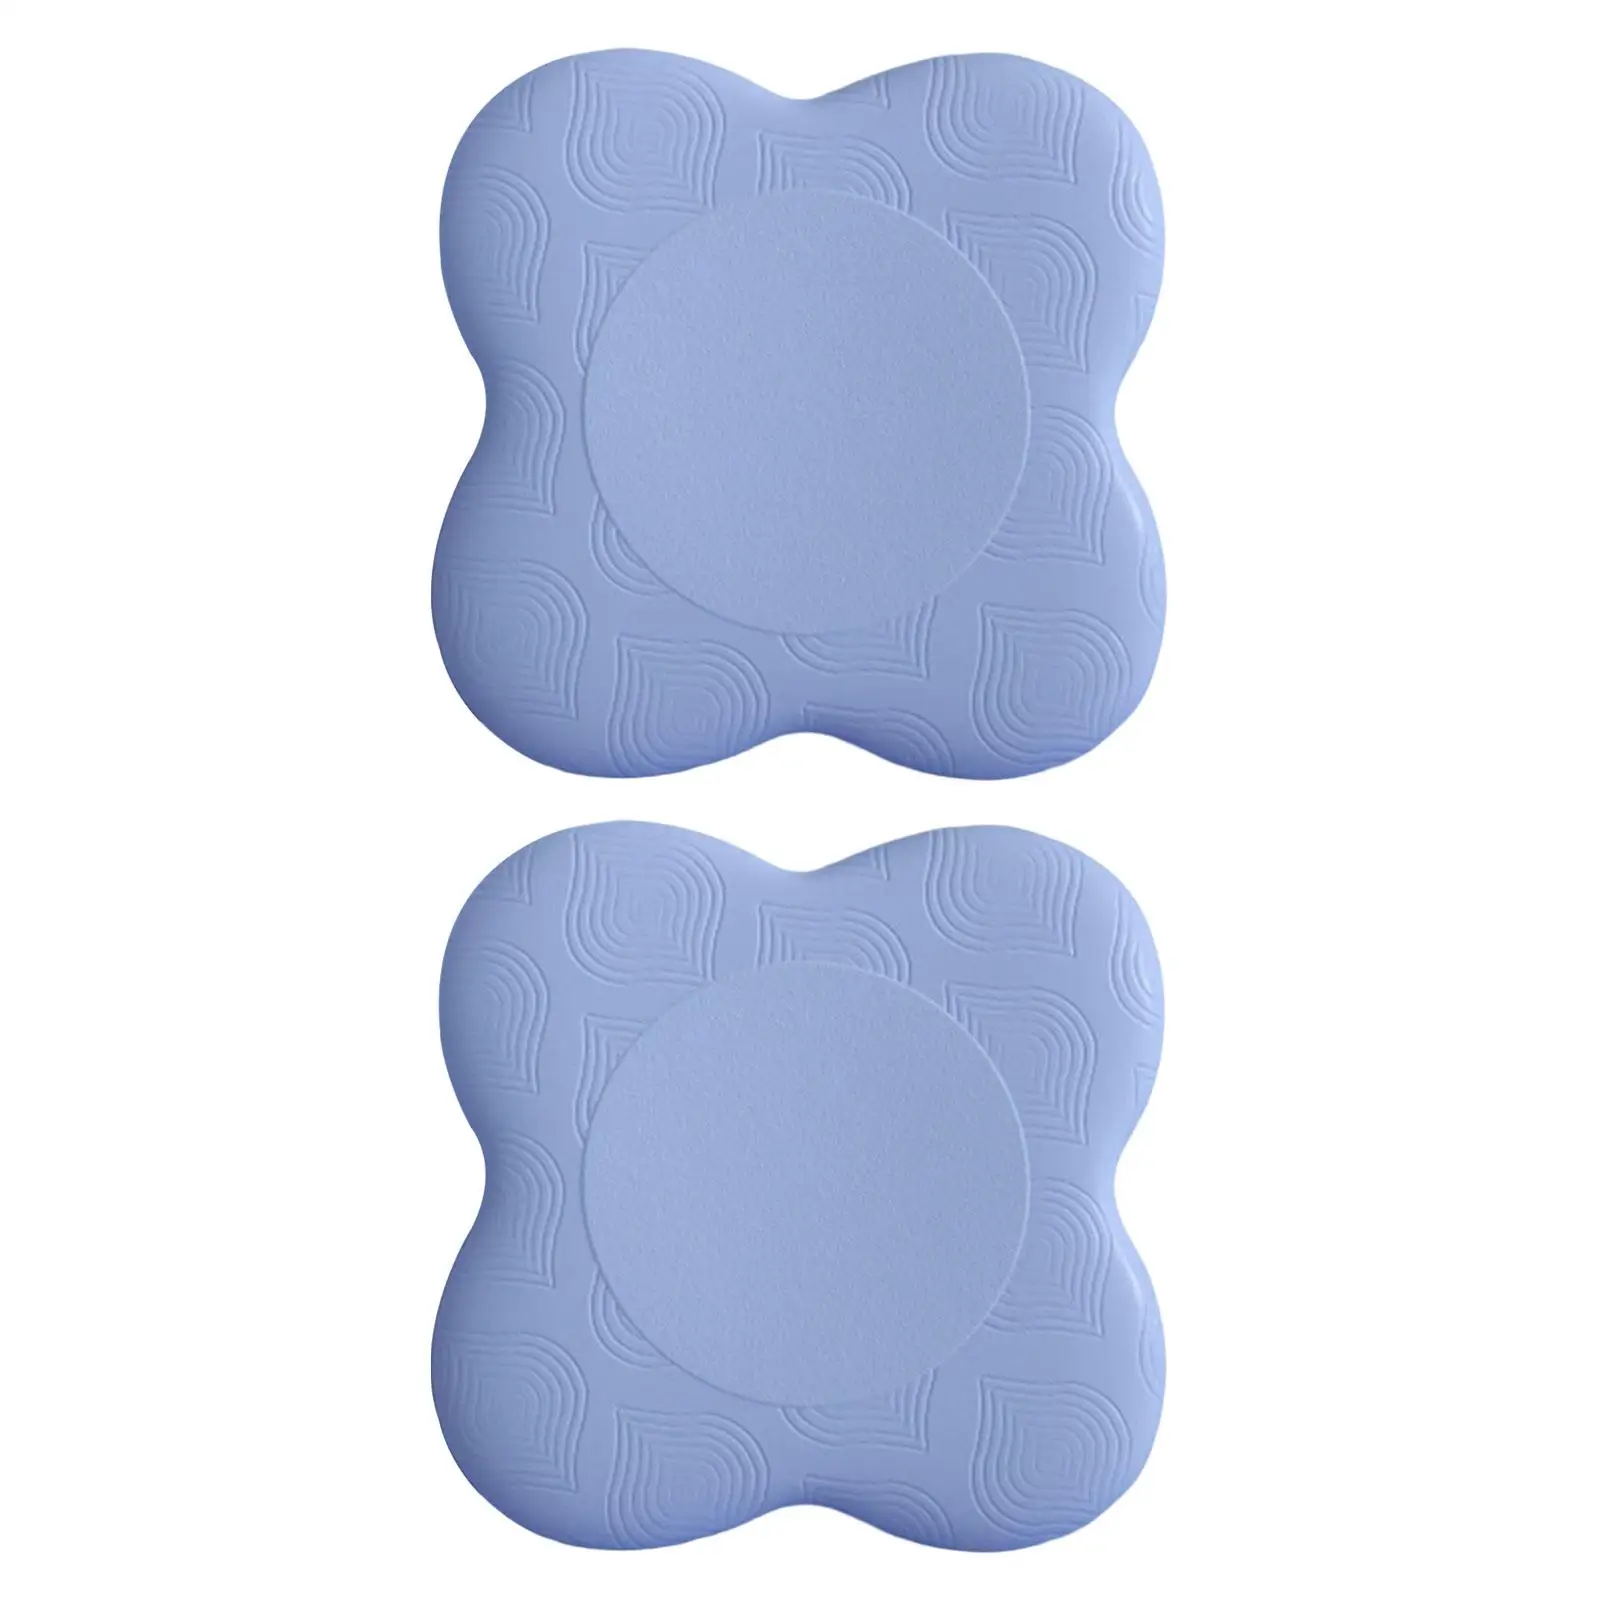 2x Yoga Knee Pads Lightweight Soft Exercise Workout Knee Pad Balance Cushion Yoga Pad for Ankle Knee Workout Balance Gym